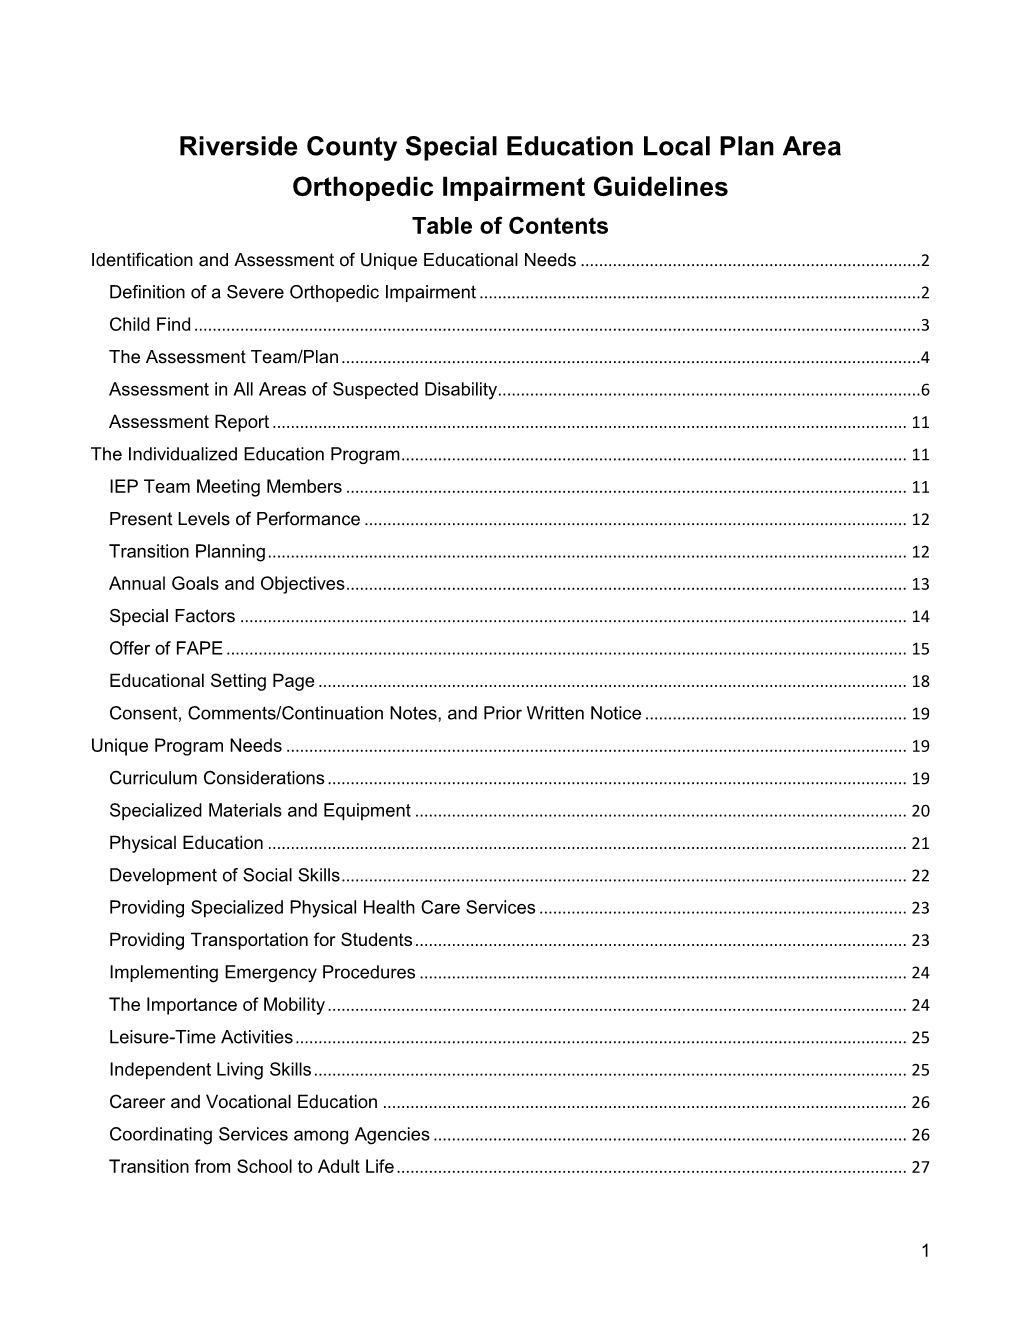 Orthopedic Impairment Guidelines Table of Contents Identification and Assessment of Unique Educational Needs